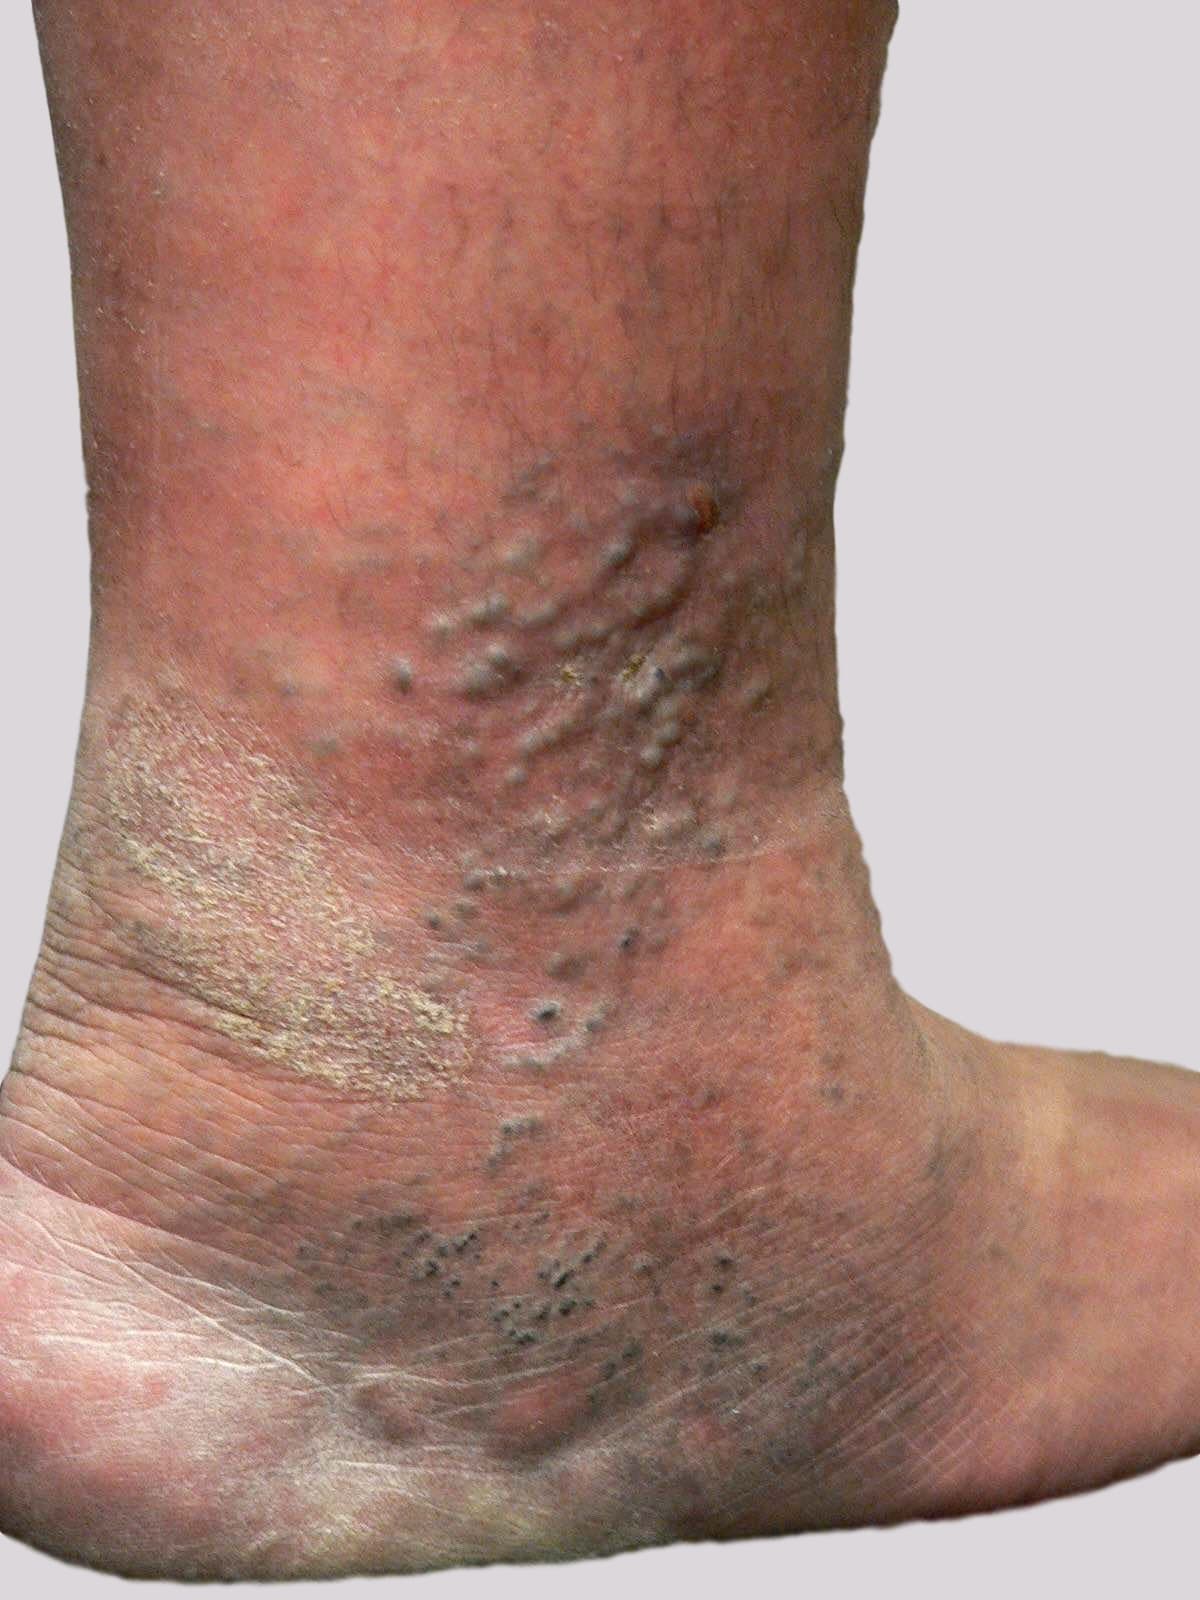 Eczema And Varicose Veins Indicating Problems